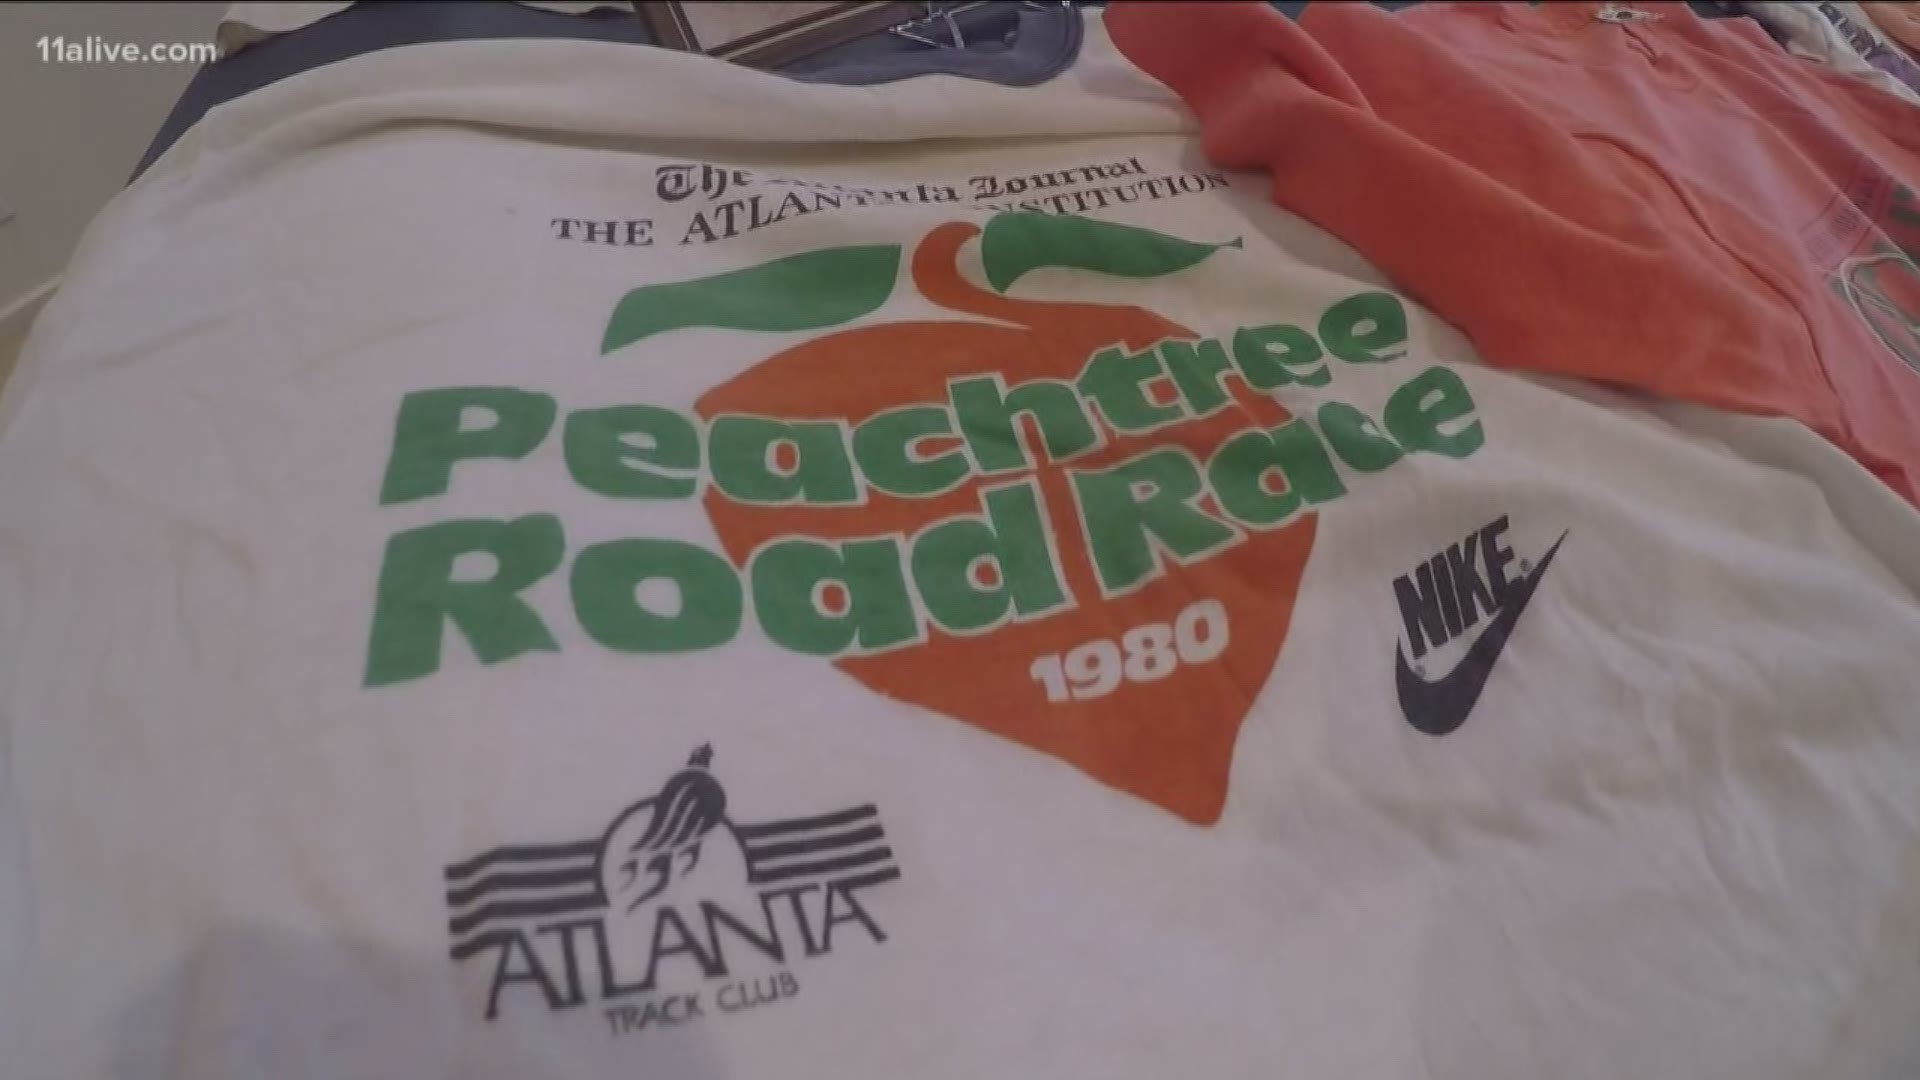 For Peachtree competitors, the t-shirt is like an Olympic gold medal